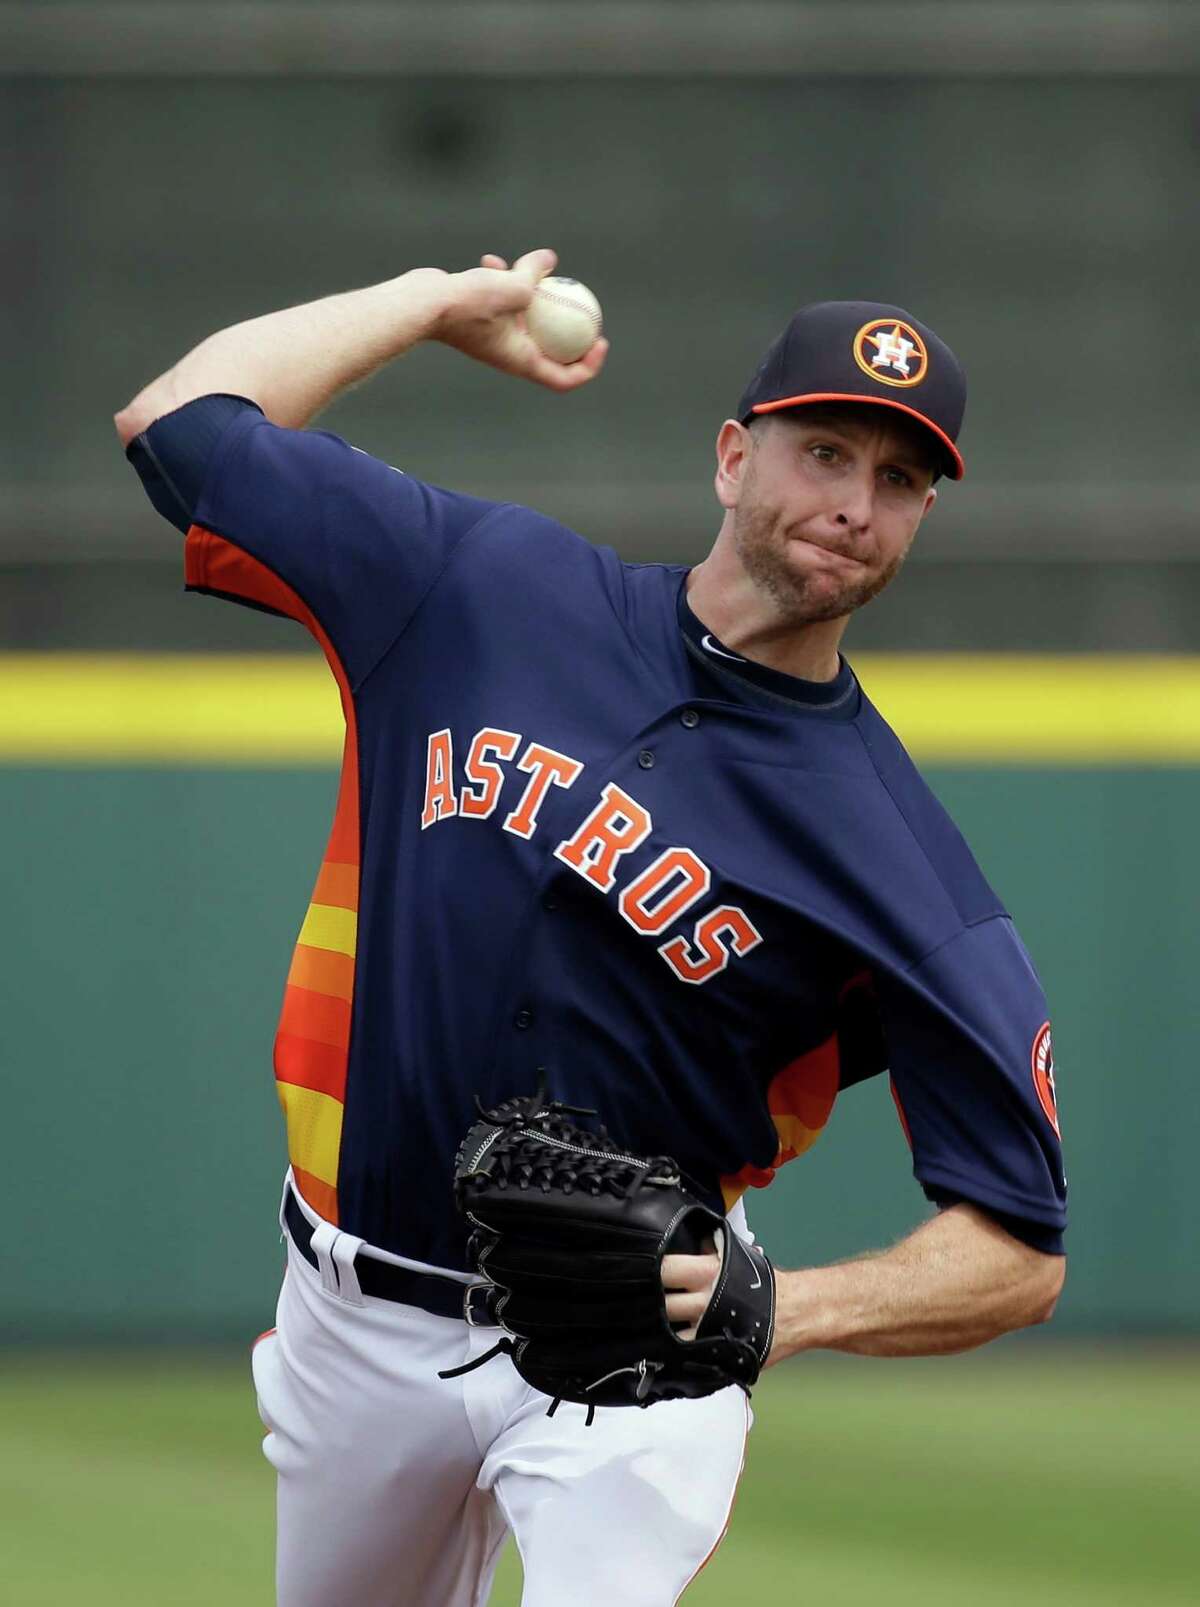 Houston Astros' Scott Feldman pitches against the Detroit Tigers in the first inning of a spring training baseball game, Friday, March 11, 2016, in Kissimmee, Fla.